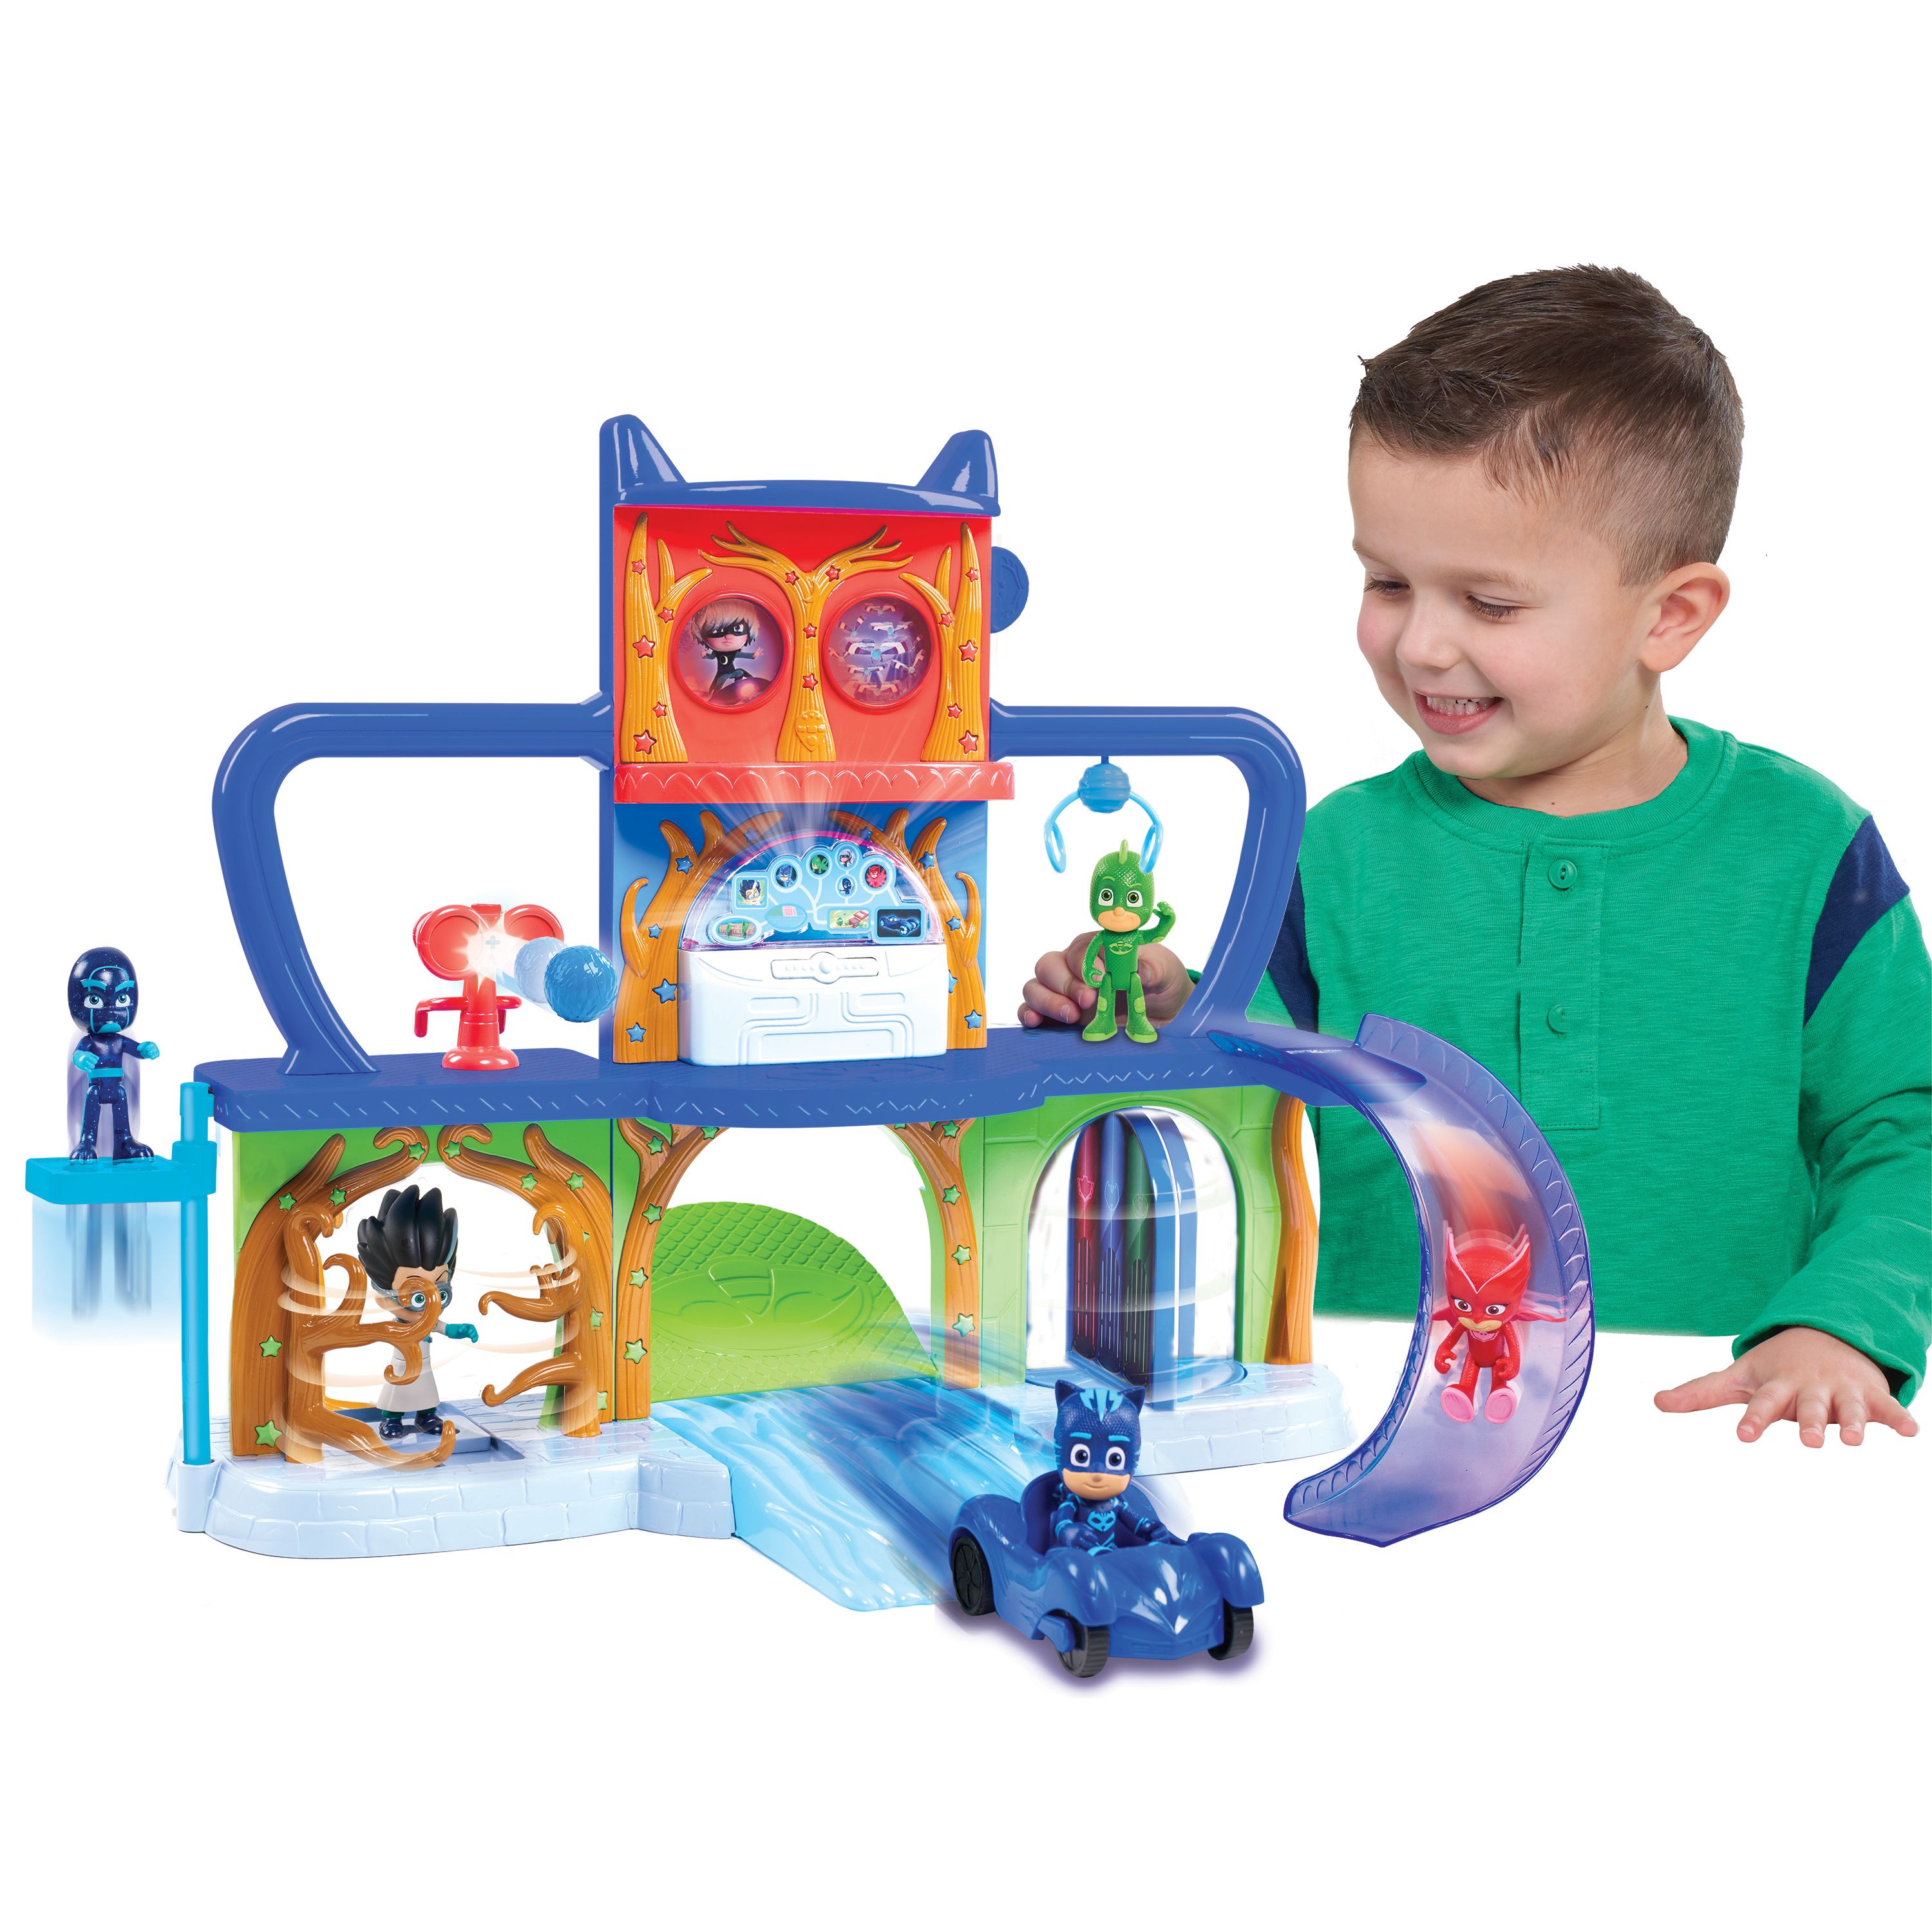 PJ Masks Headquarters Playset, with 3" Catboy Figure - Walmart Exclusive - image 5 of 6